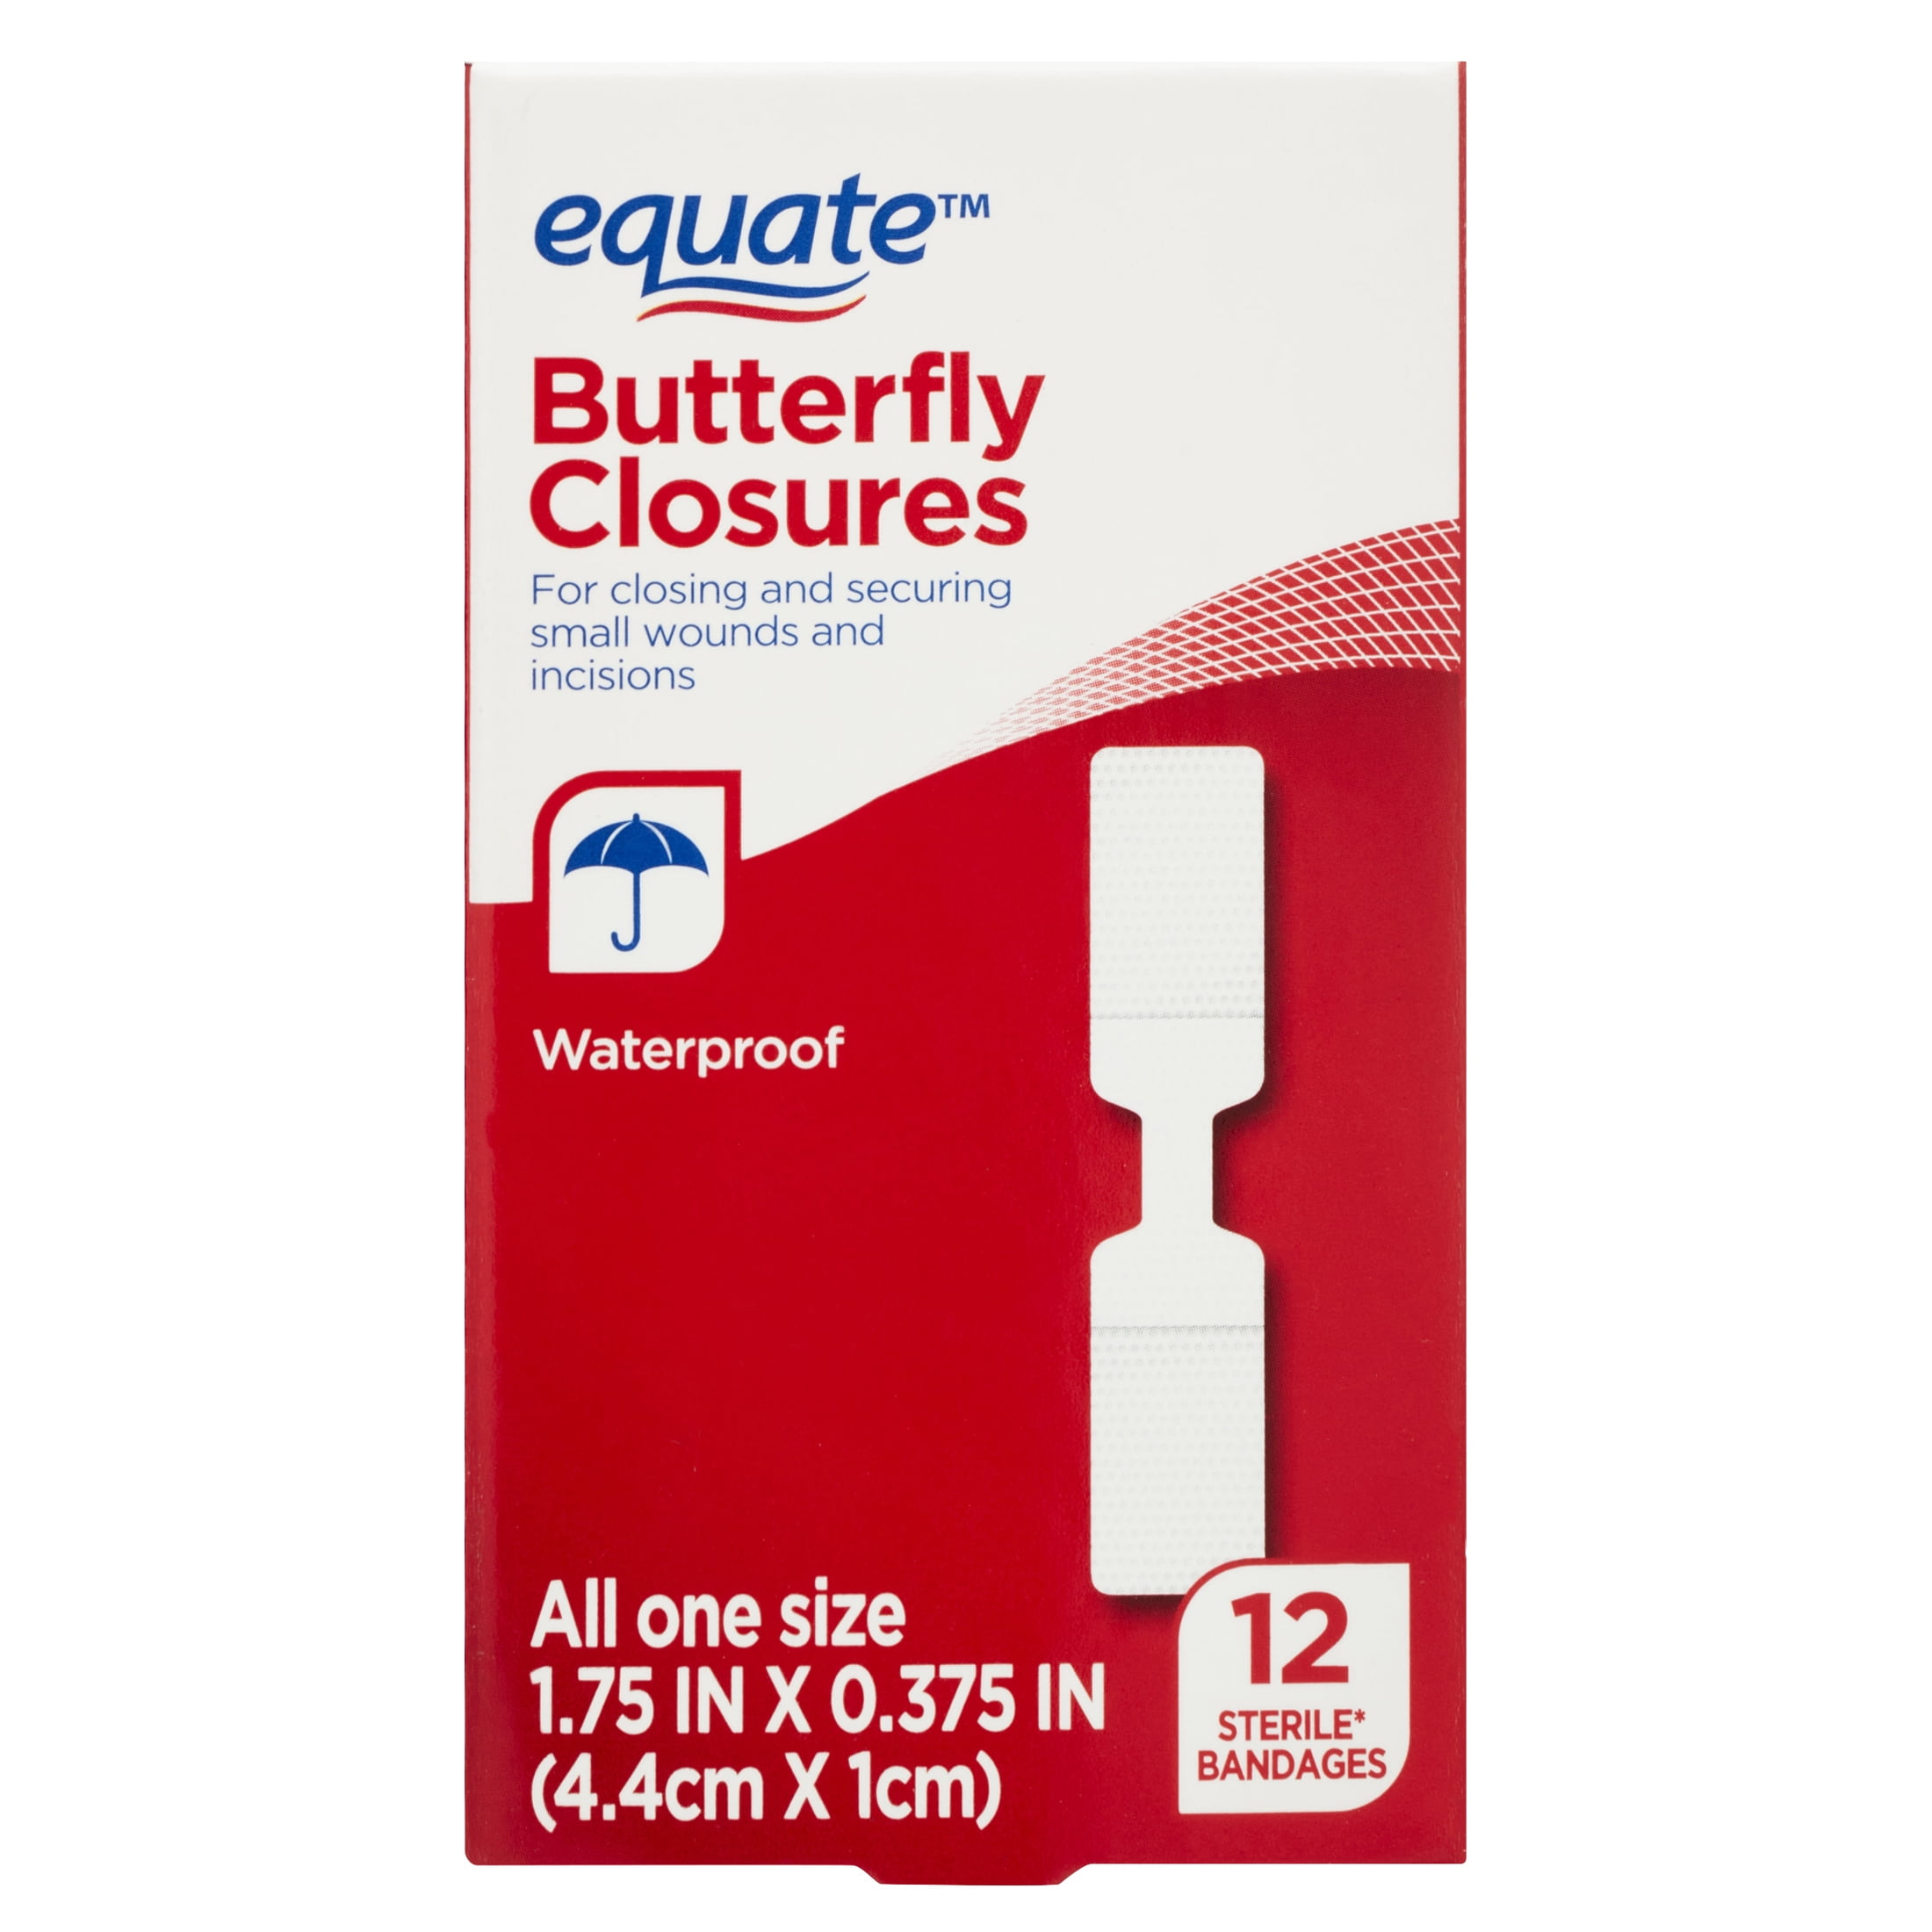 Equate Butterfly Closures Adhesive Bandages, 12 Count